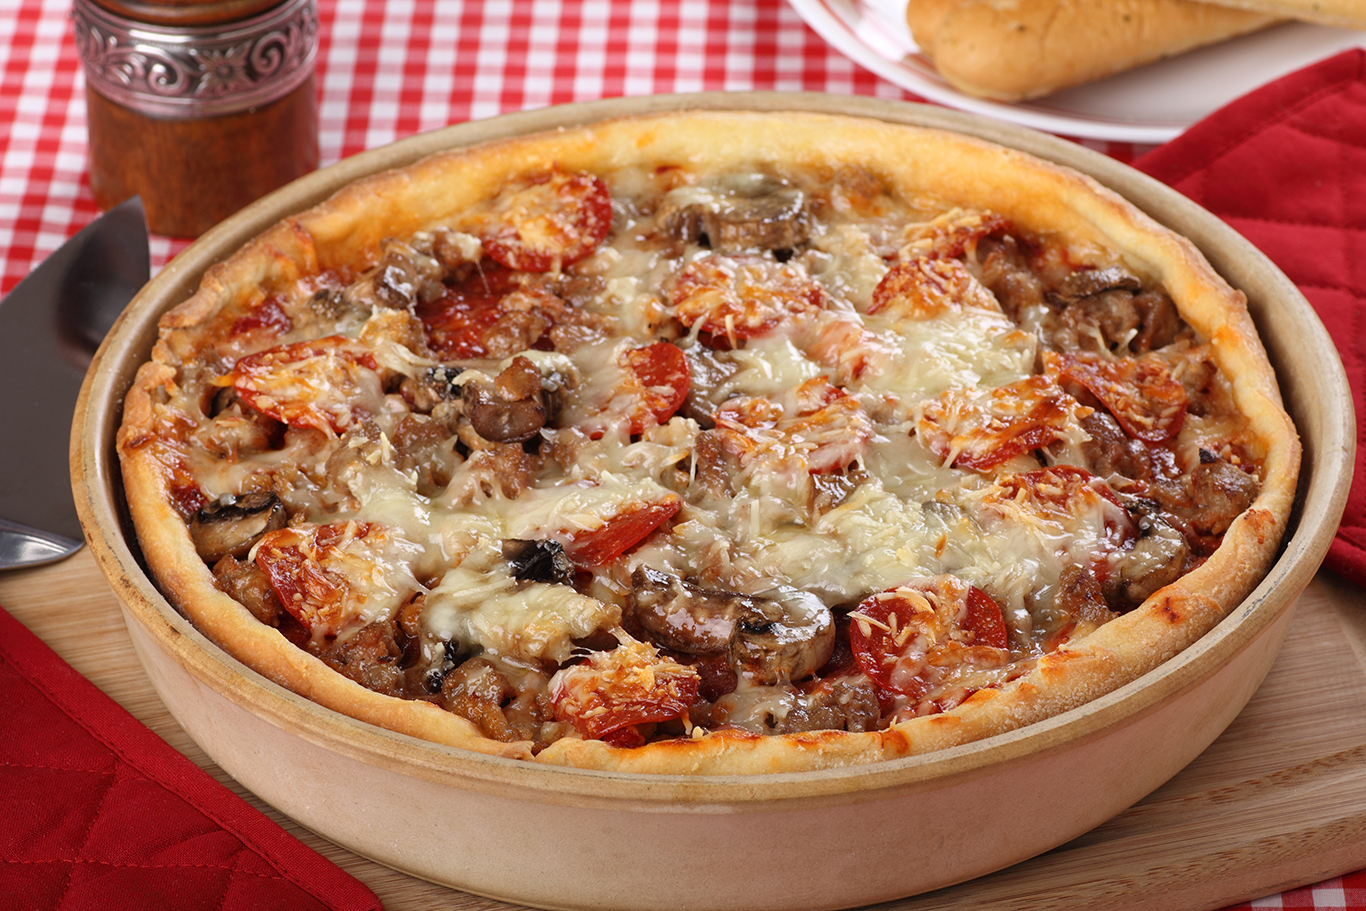 https://recipes.net/wp-content/uploads/portal_files/recipes_net_posts/2021-04/deep-dish-pizza-with-sausage-and-mushrooms-recipe.jpg